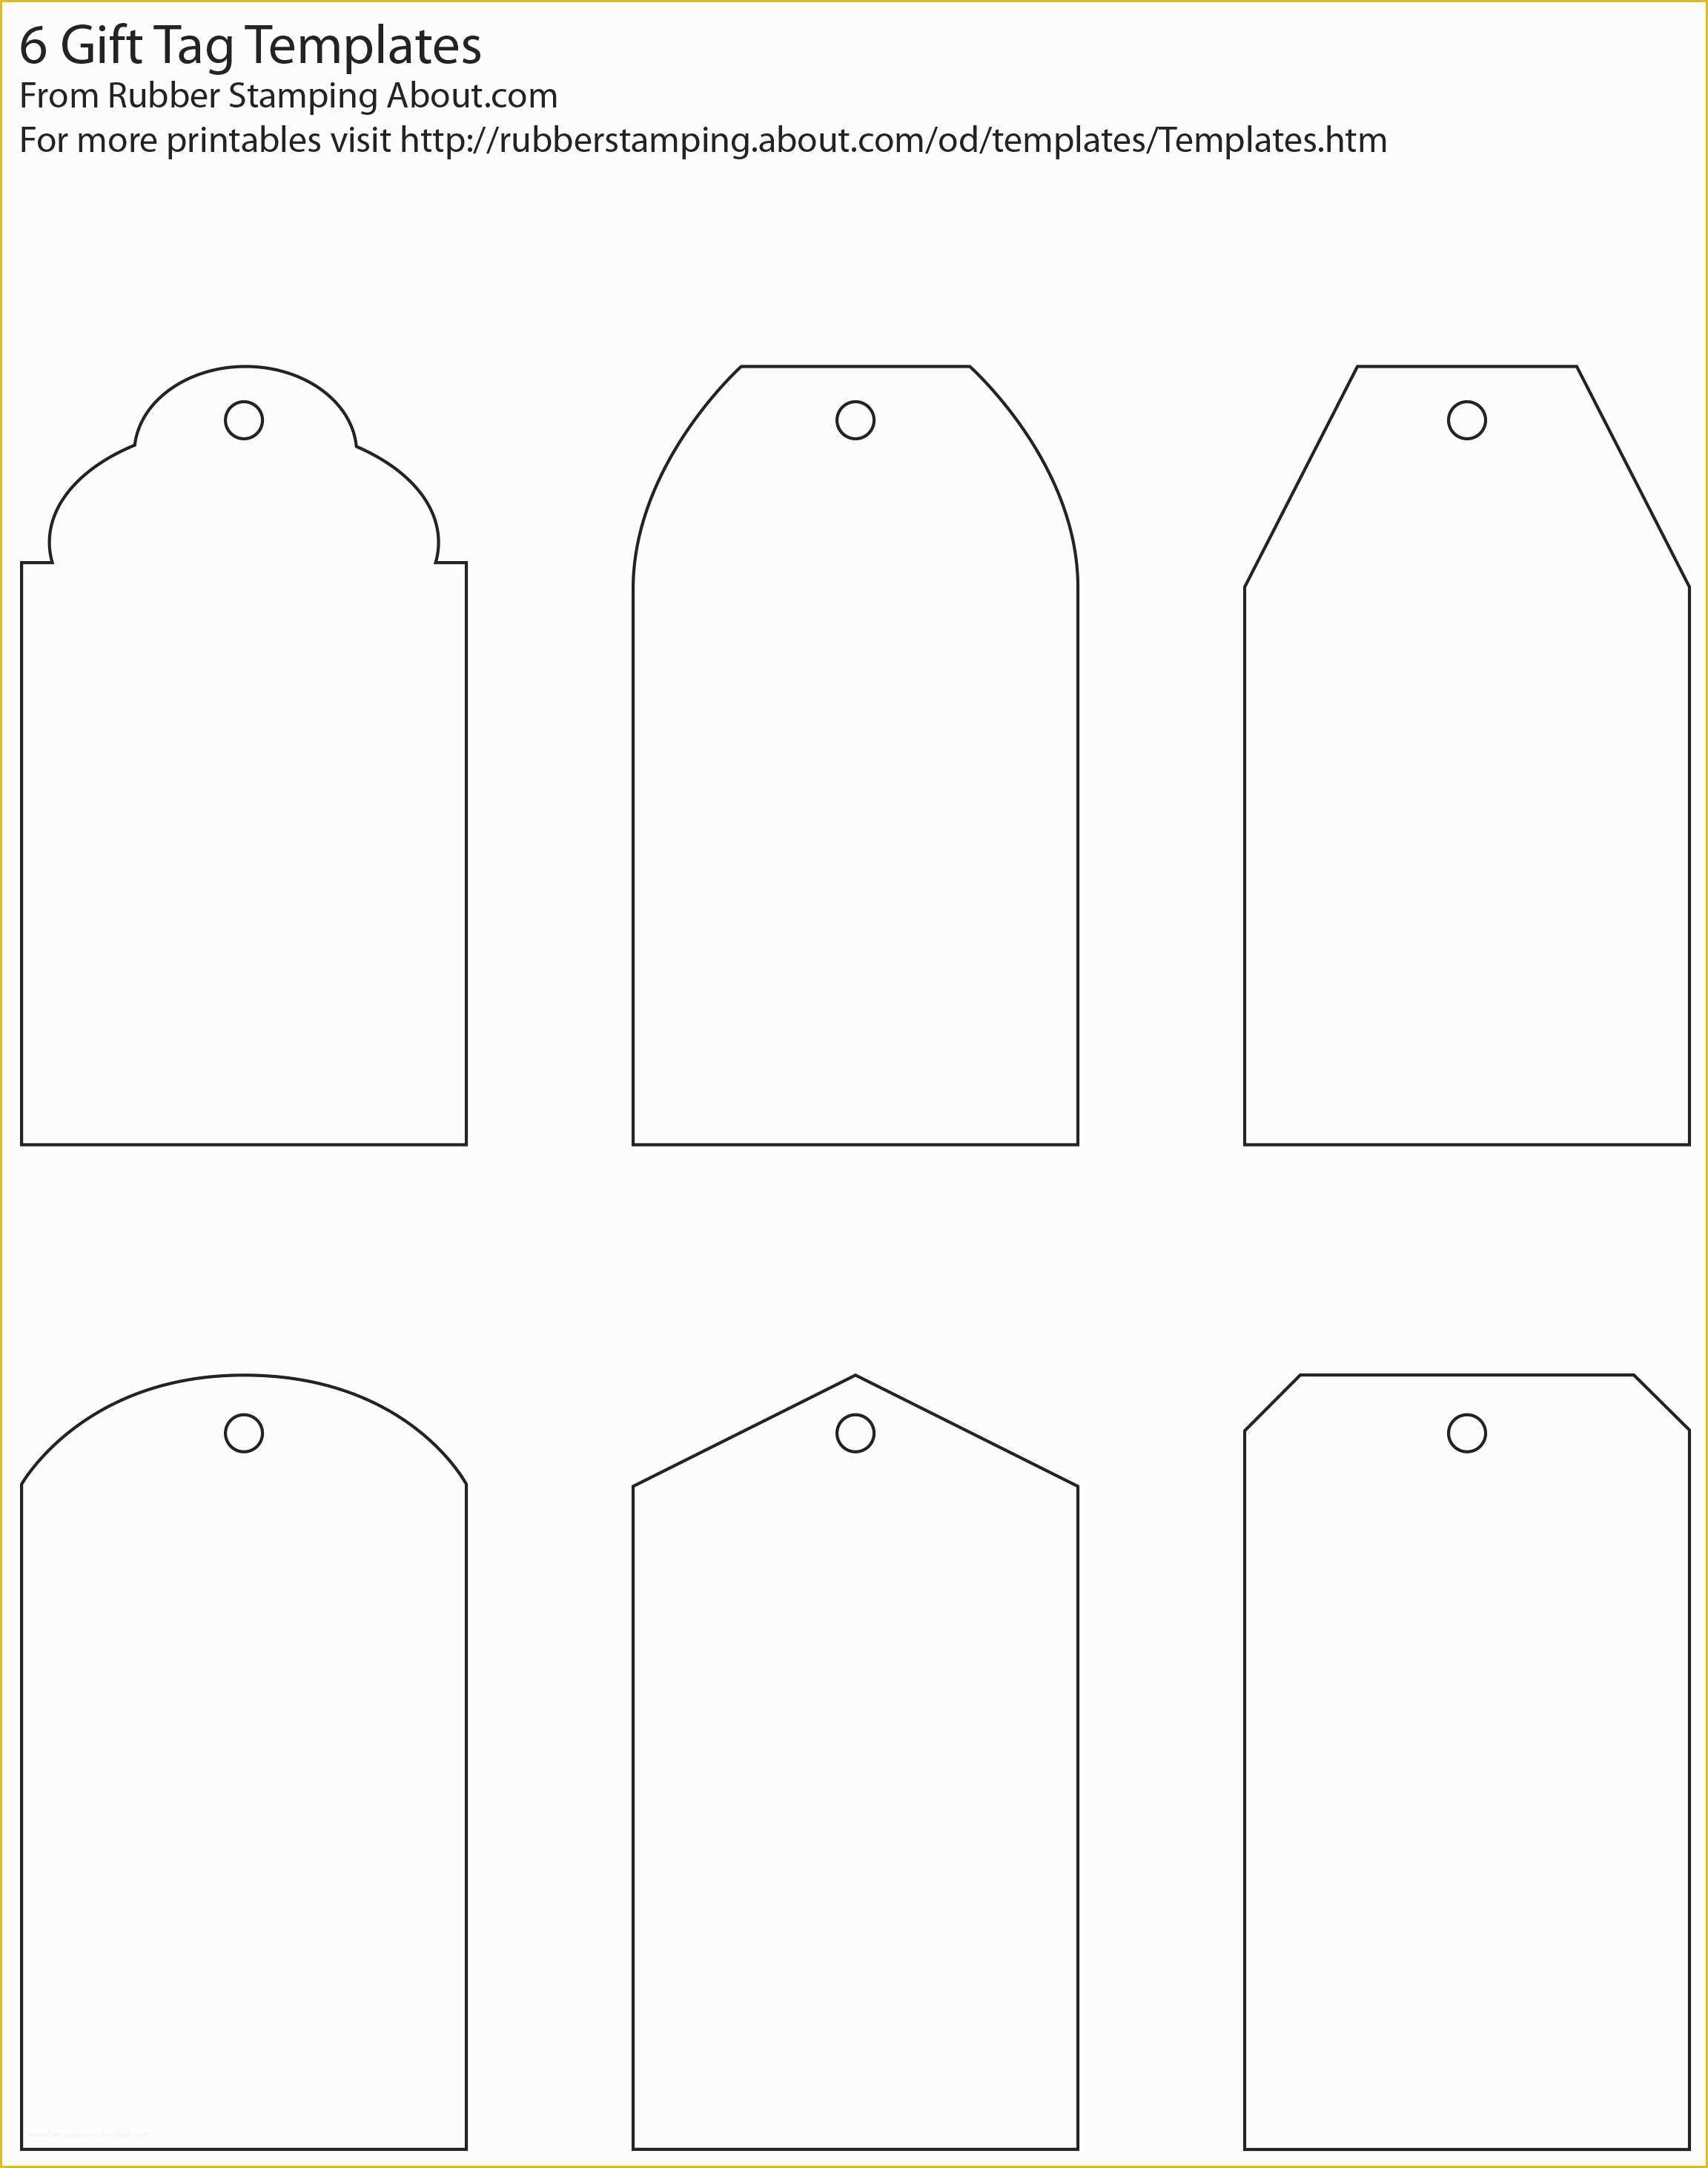 Free Printable Gift Tag Templates for Word Of Make Your Own Custom Gift Tags with these Free Printable